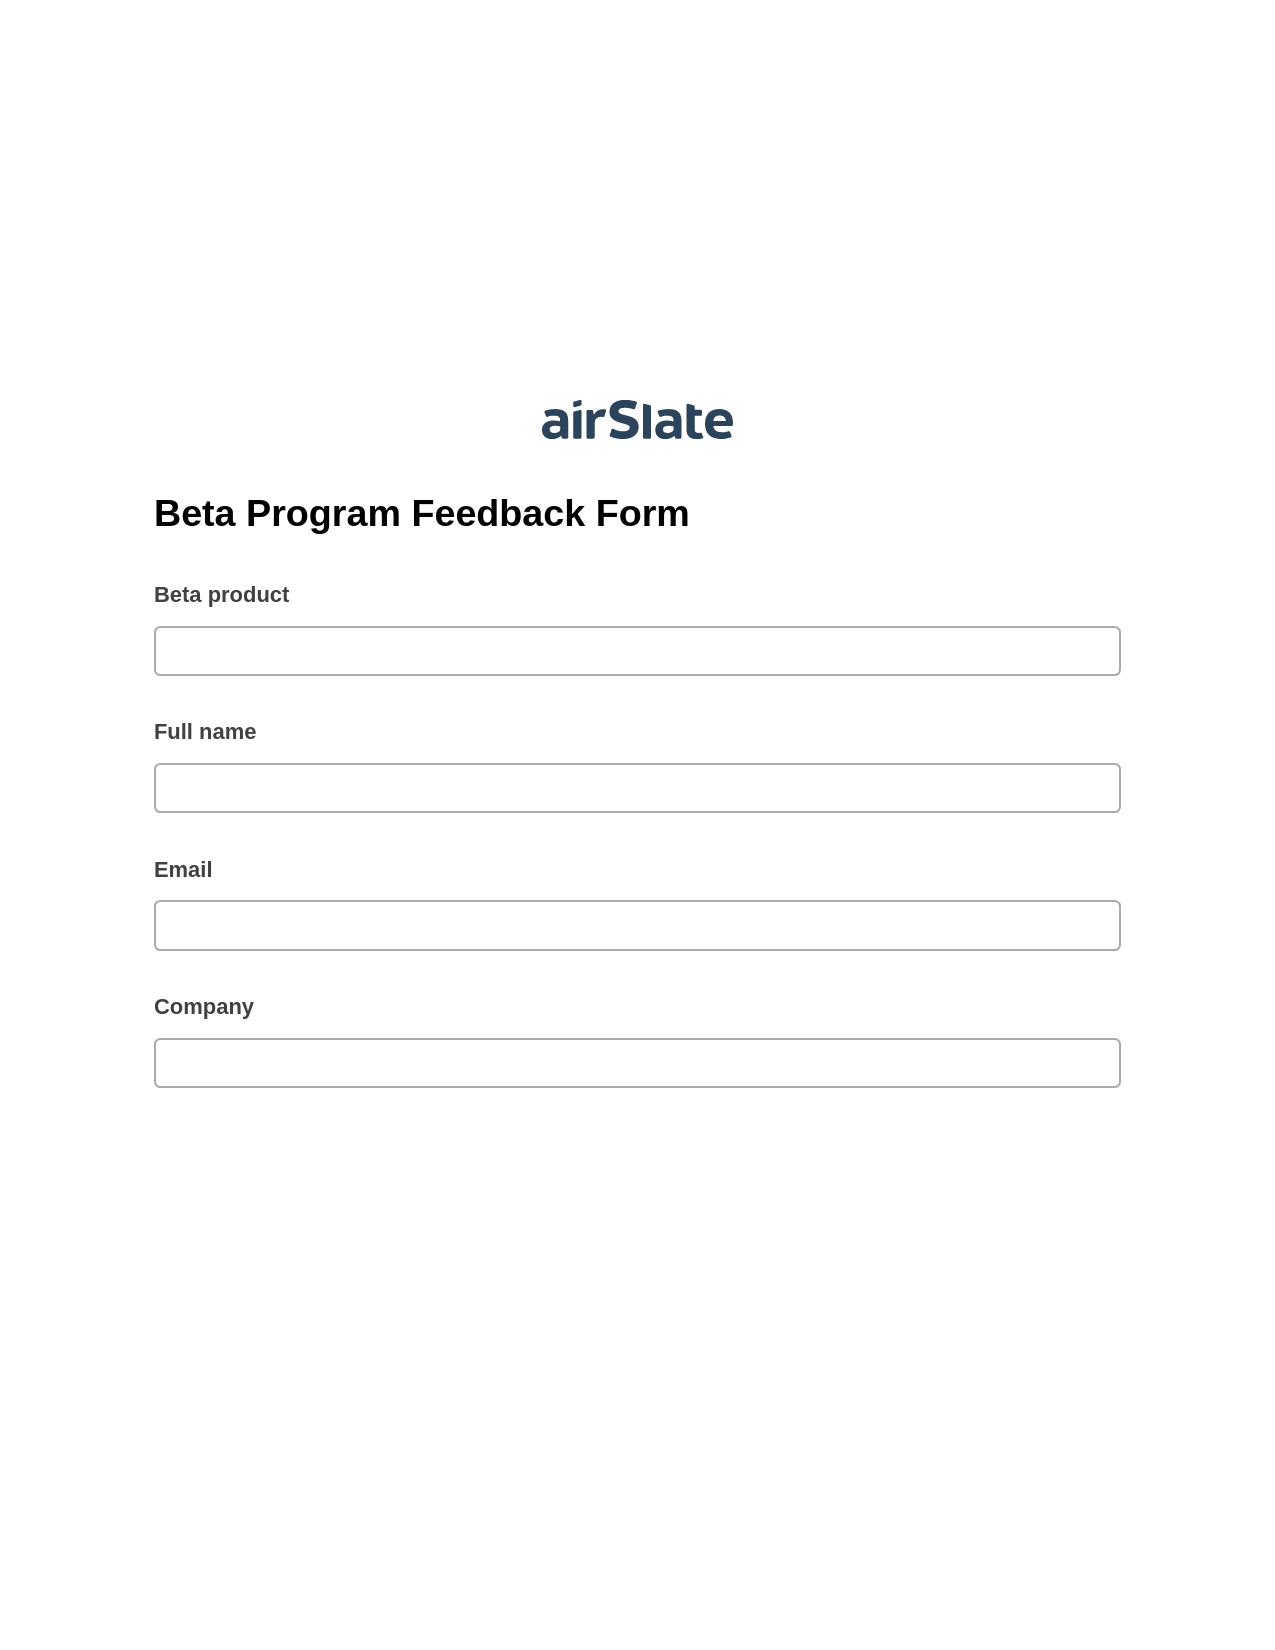 Multirole Beta Program Feedback Form Pre-fill from Excel Spreadsheet Bot, System Bot - Create a Slate in another Flow, Slack Notification Postfinish Bot